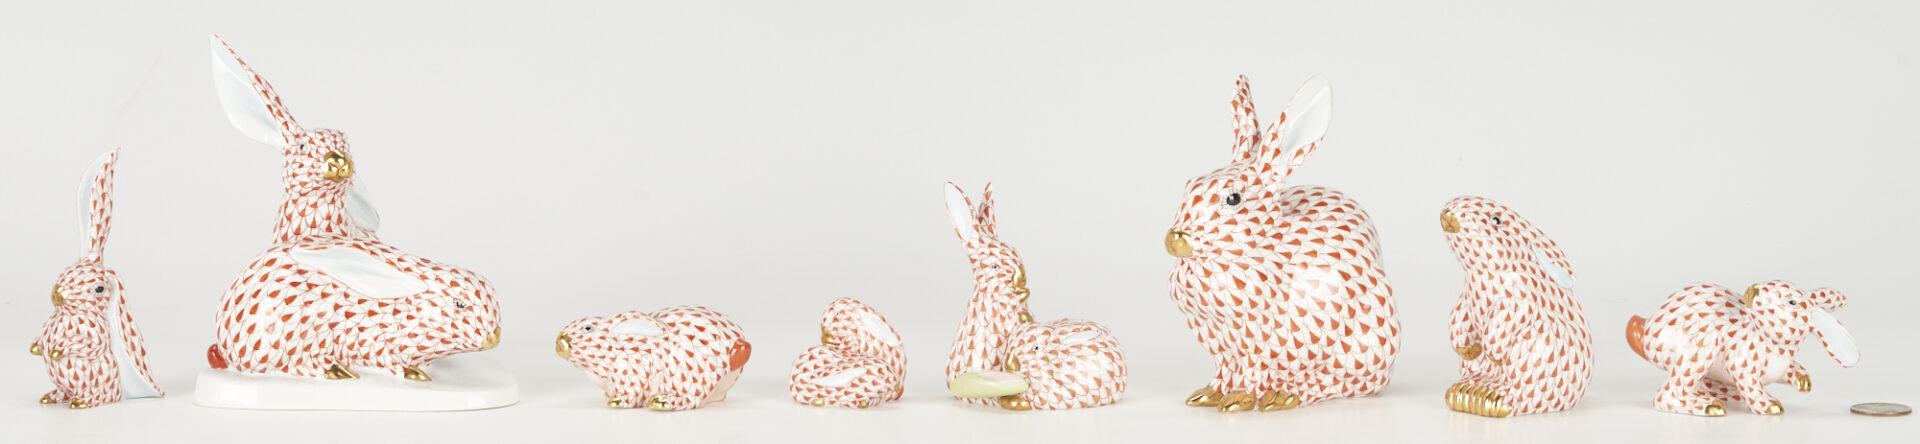 Lot 360: 8 Herend Porcelain Rabbits, Red Fishnet Decoration incl. Bunnies with Corn